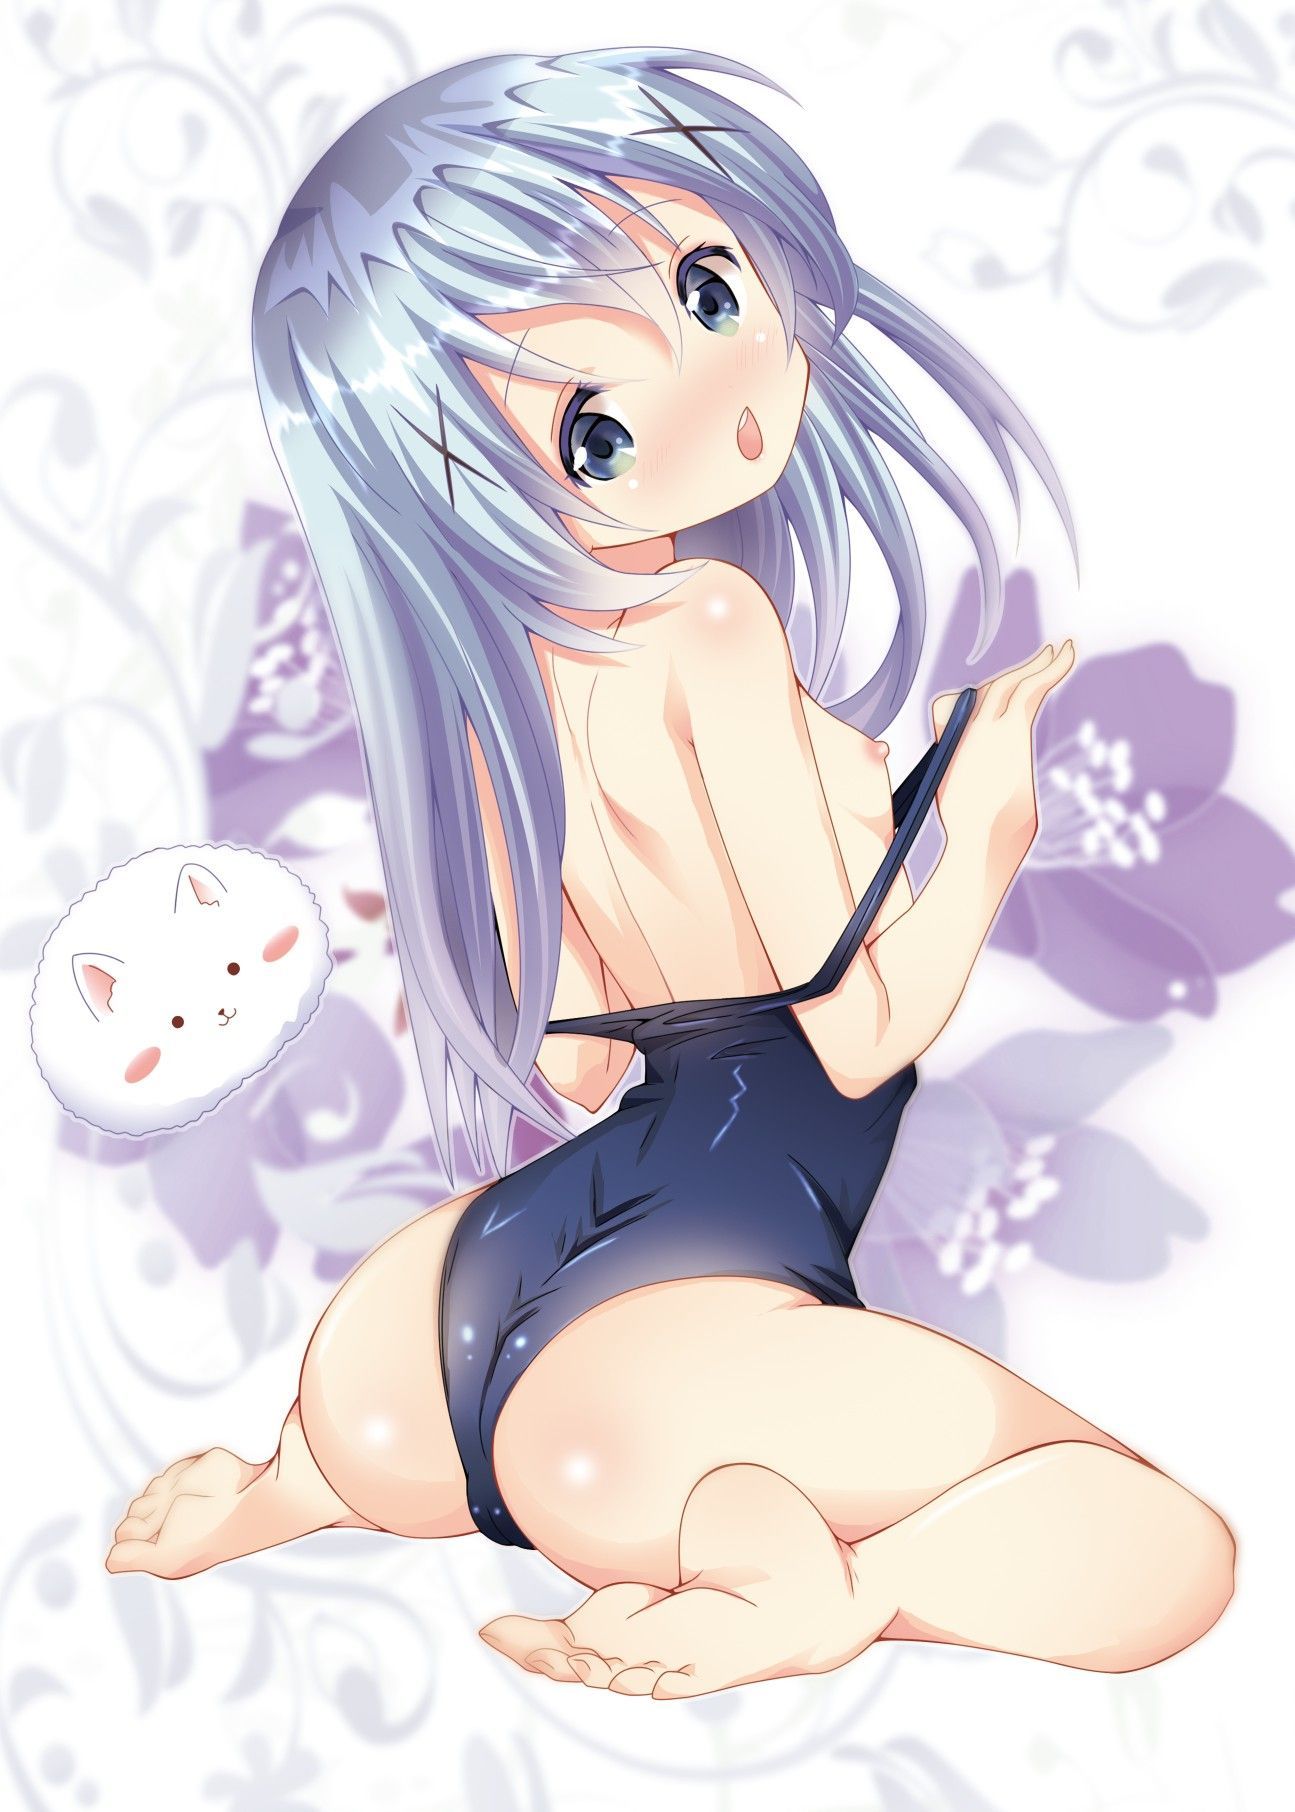 【Secondary Erotic】Is your order a rabbit? Here is the erotic image of Chino of the character 18